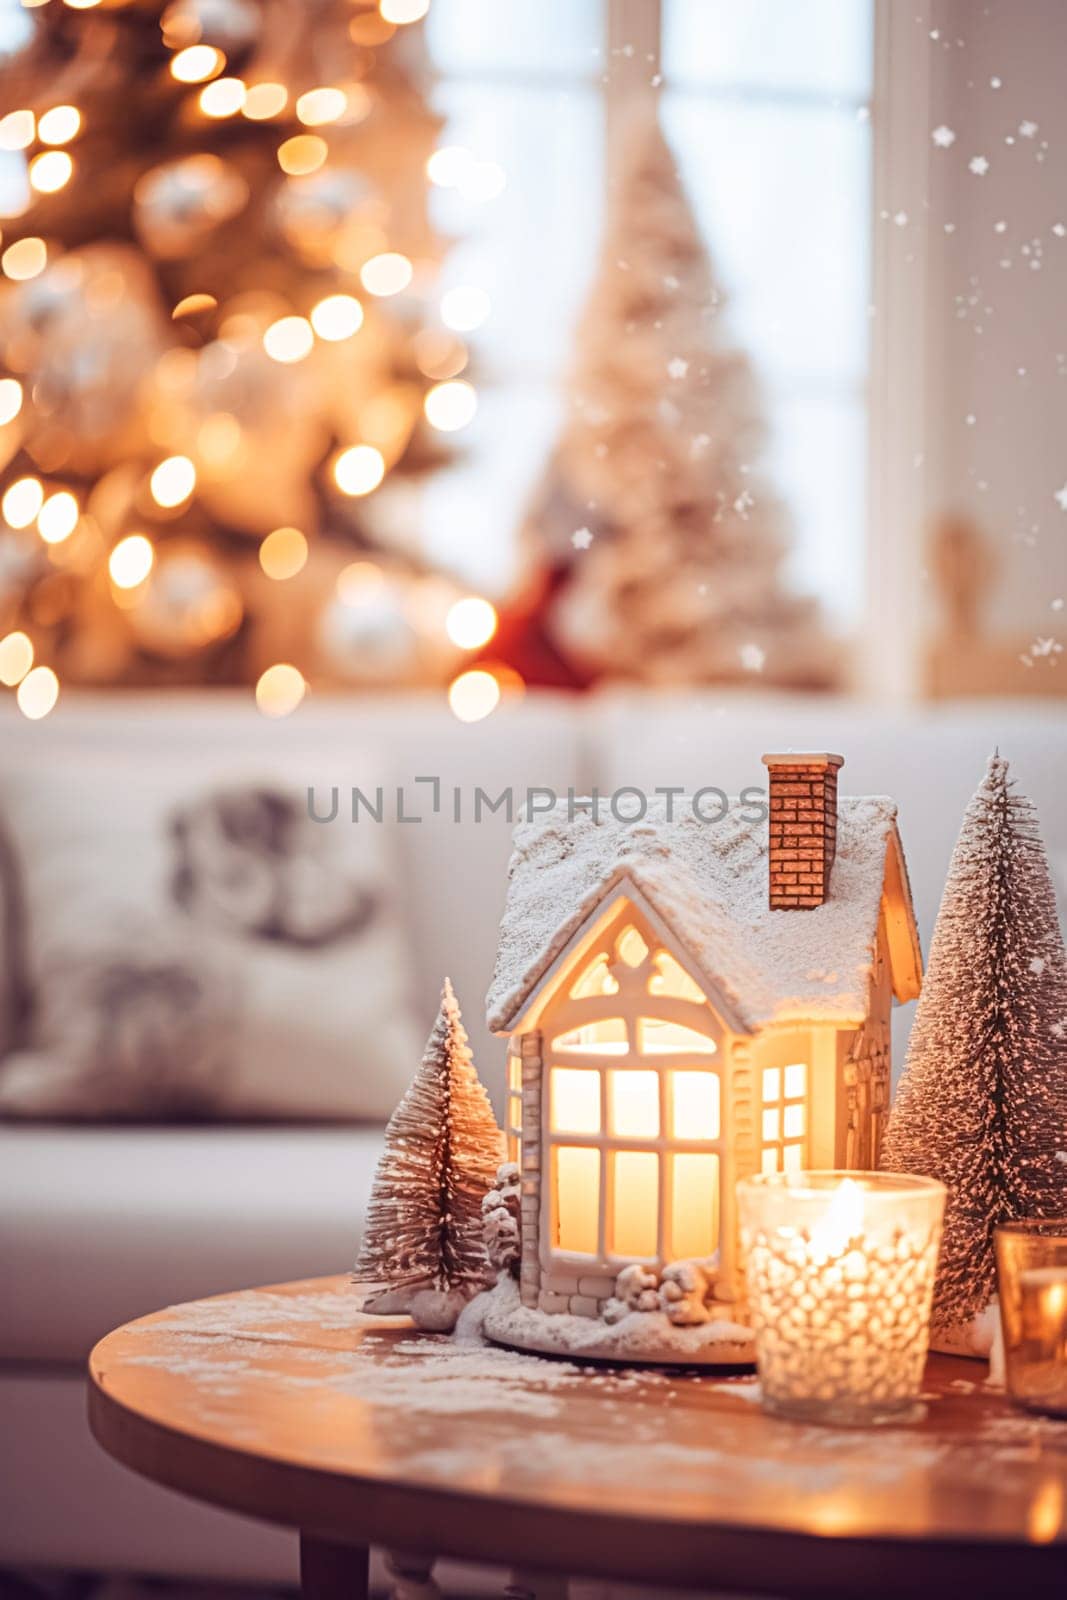 Christmas toy house home decor, country cottage style house decoration for an English countryside home, winter holiday celebration and festive atmosphere, Merry Christmas and Happy Holidays inspiration